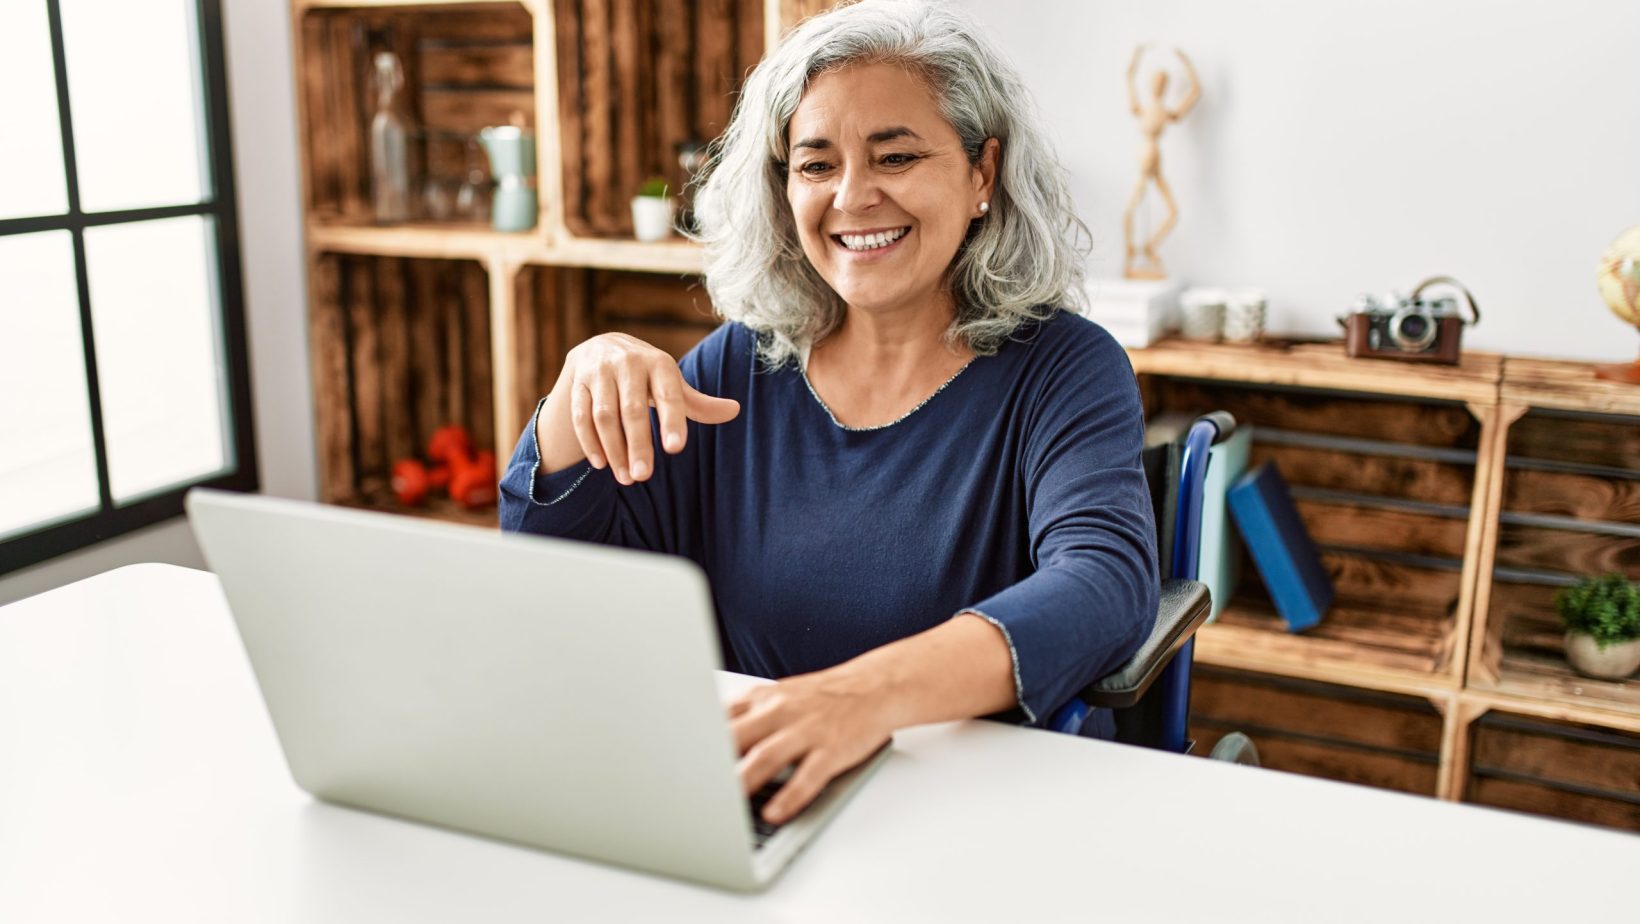 Woman smiling while using laptop sitting on wheelchair at home.